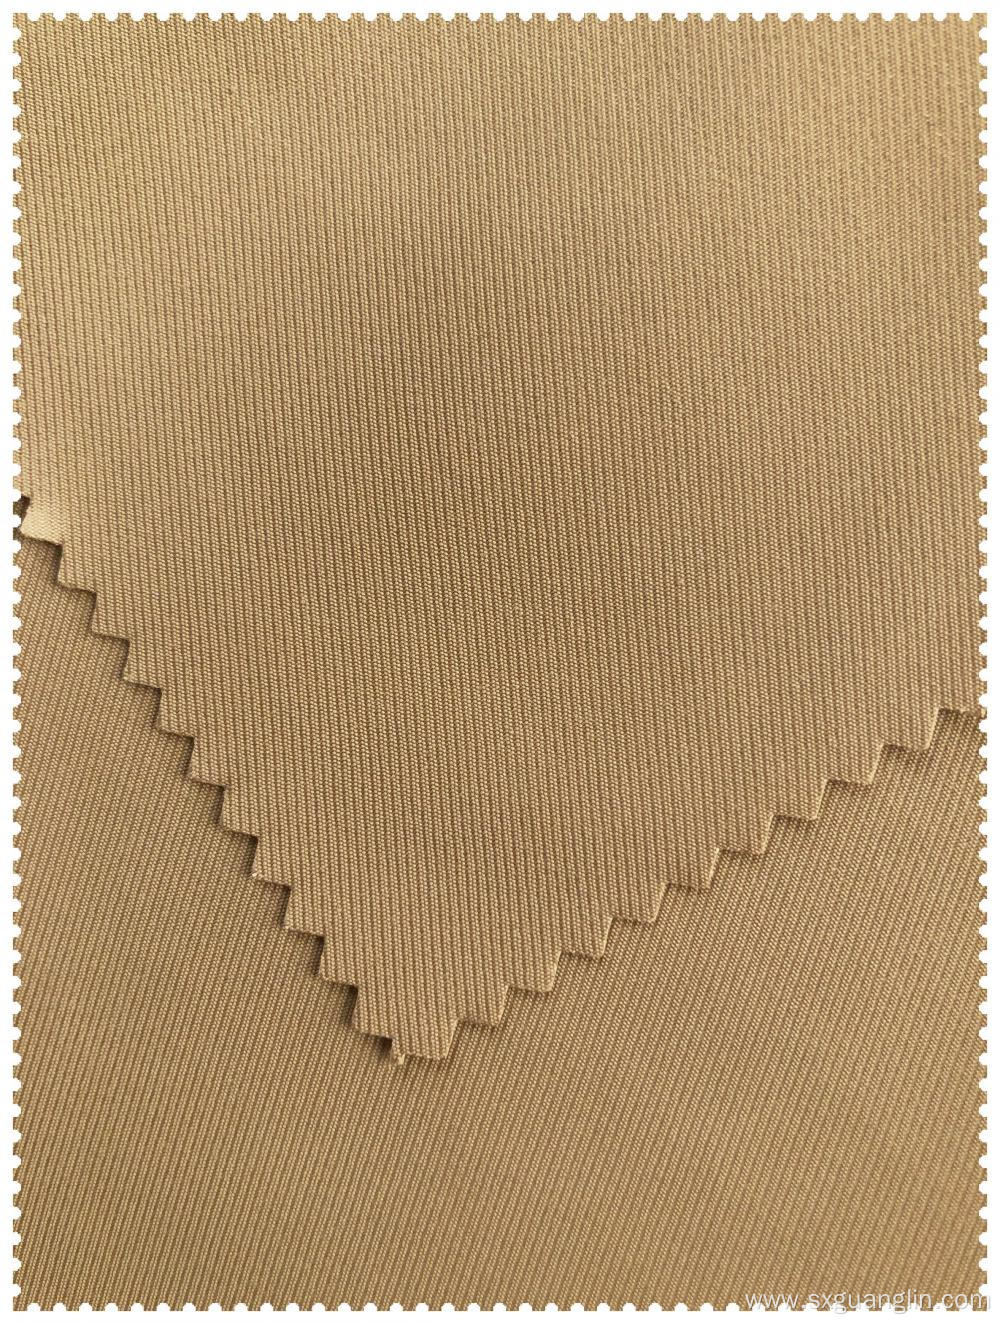 Cotton Polyester Twill Fabric